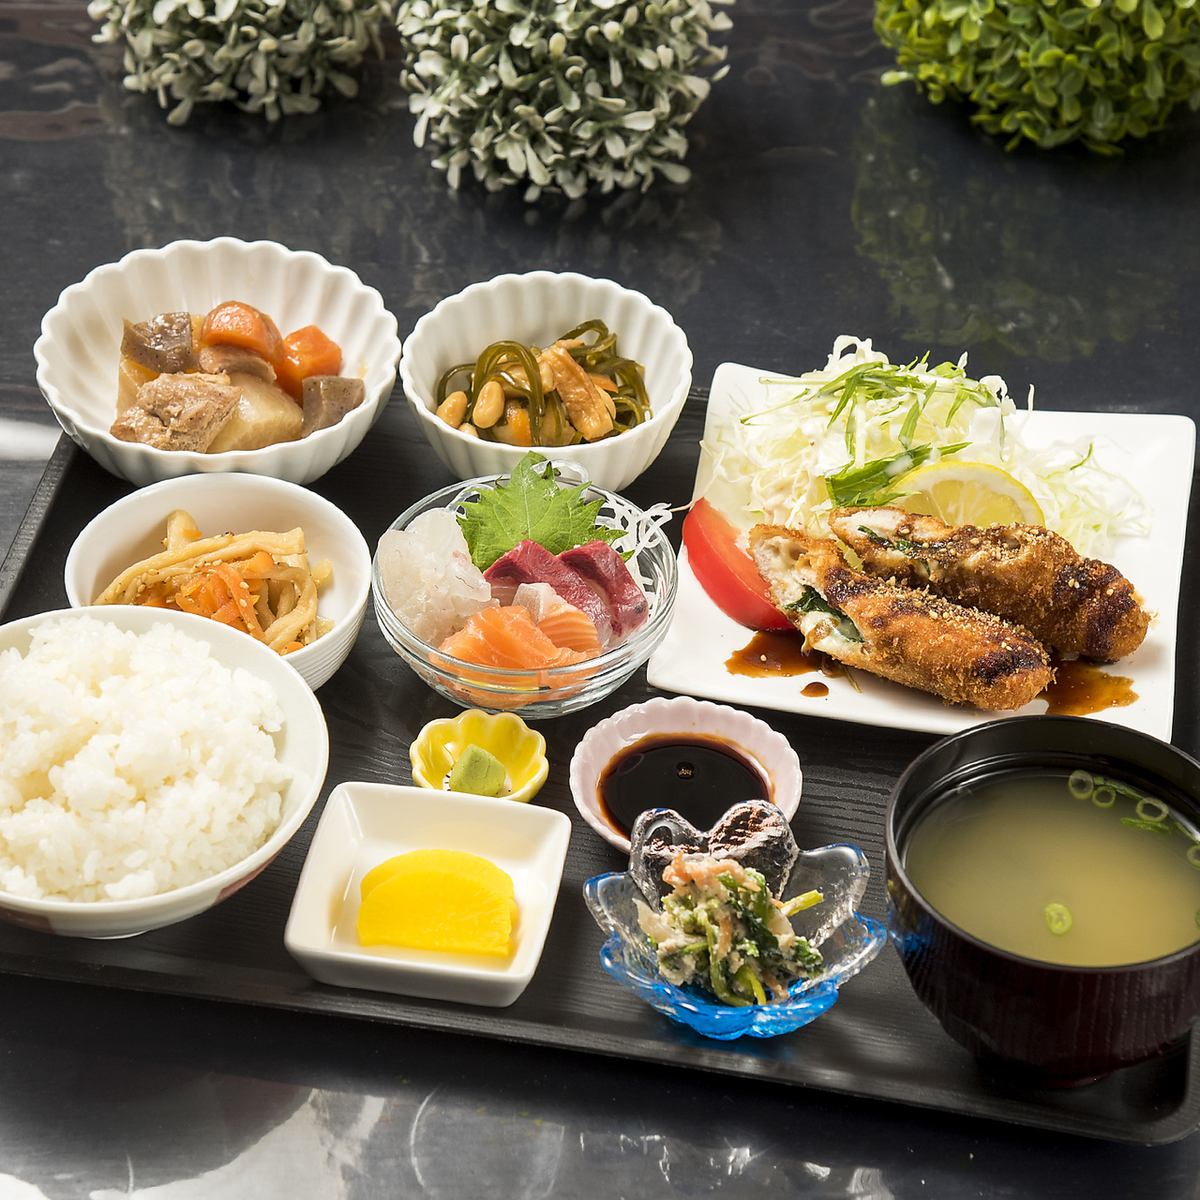 We have a wide variety of menus such as daily lunch, set meals, noodles, and rice bowls.